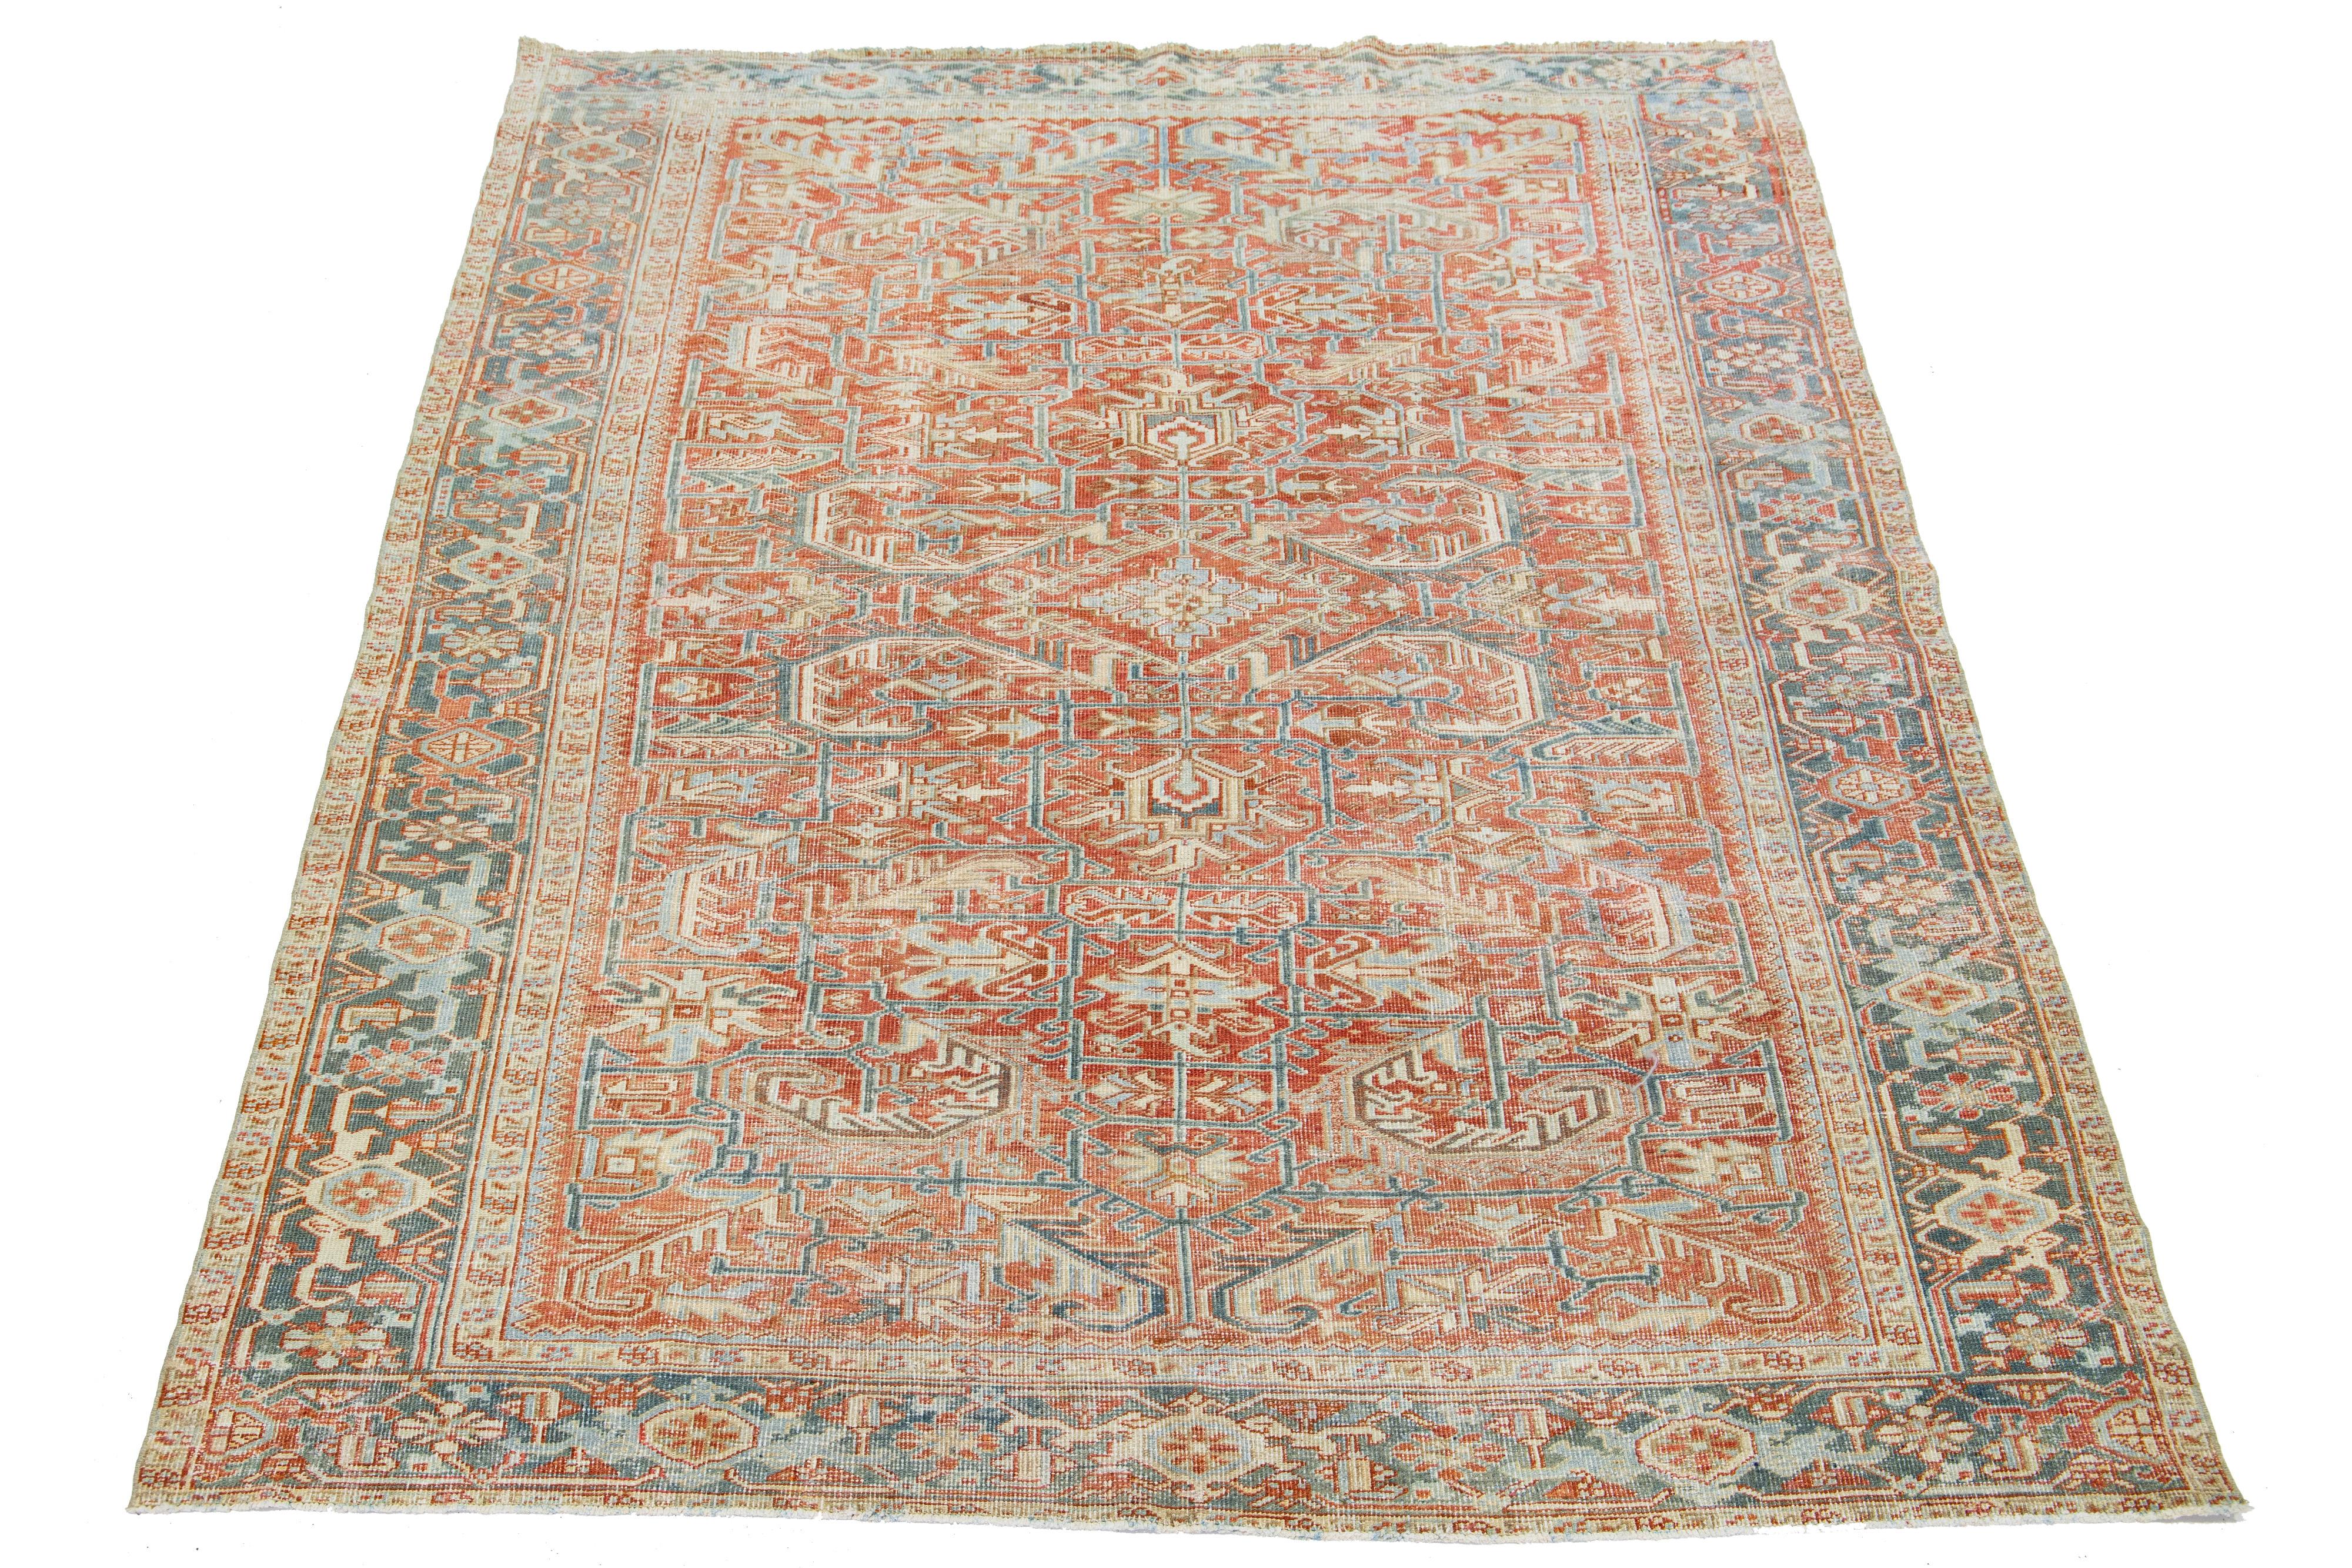 This antique Persian Heriz rug showcases an impressive overall design and is crafted with hand-knotted wool. The rust-colored background is a striking backdrop for the captivating geometric floral pattern, embellished with shades of blue, beige, and